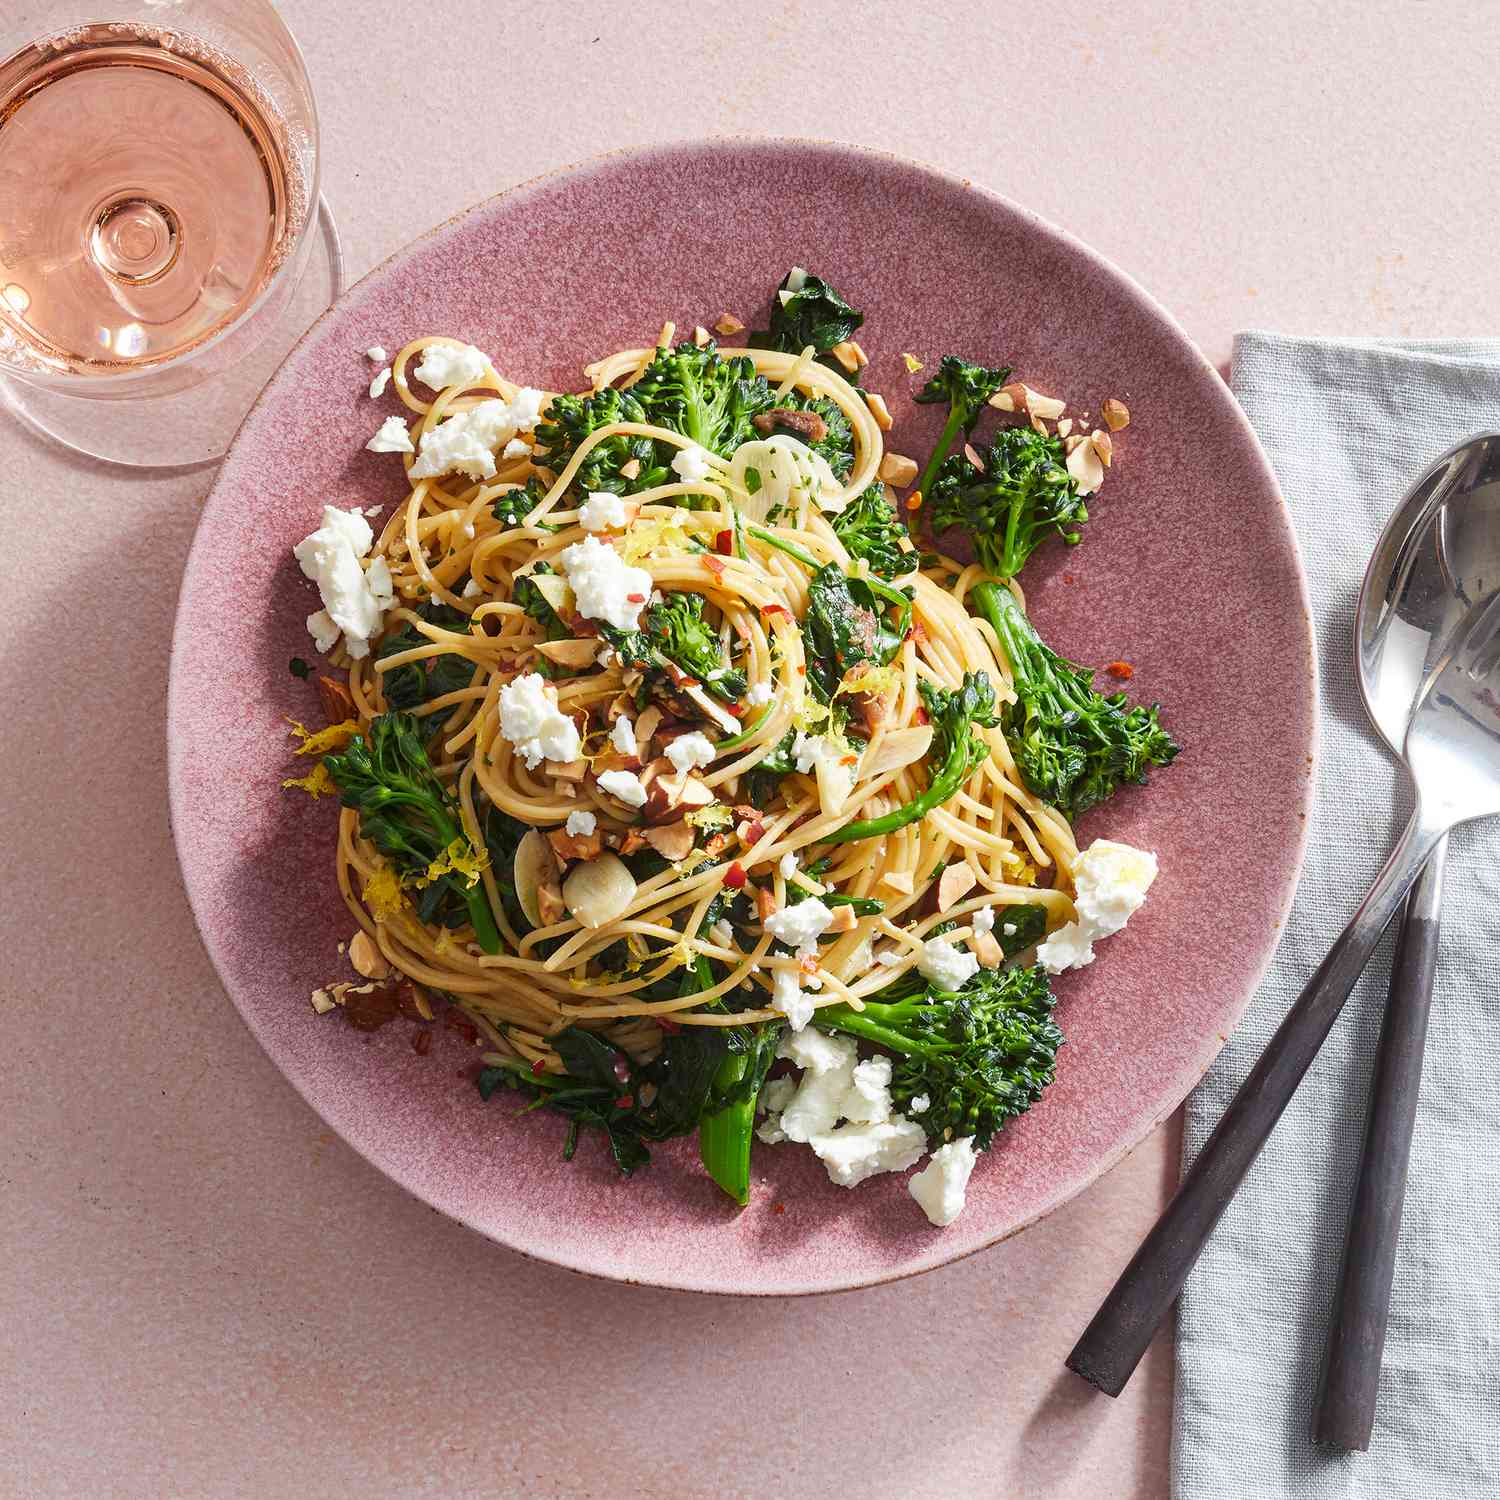 Garlic-Anchovy Pasta with Broccolini